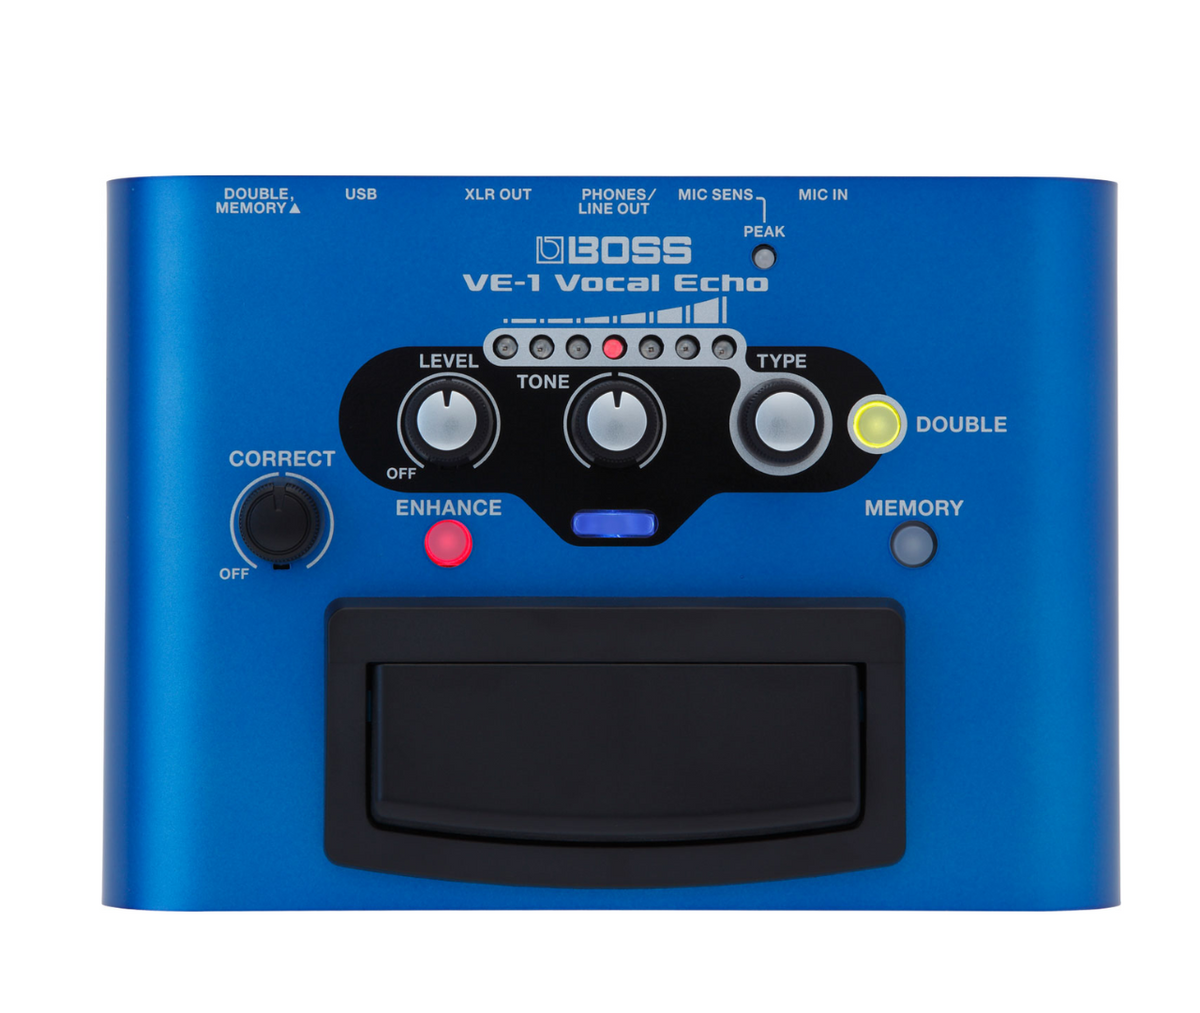 BOSS VE-1 Vocal Echo Best Audio Effects with 7 Types of Ambience Effects with Adjustable Voice Settings